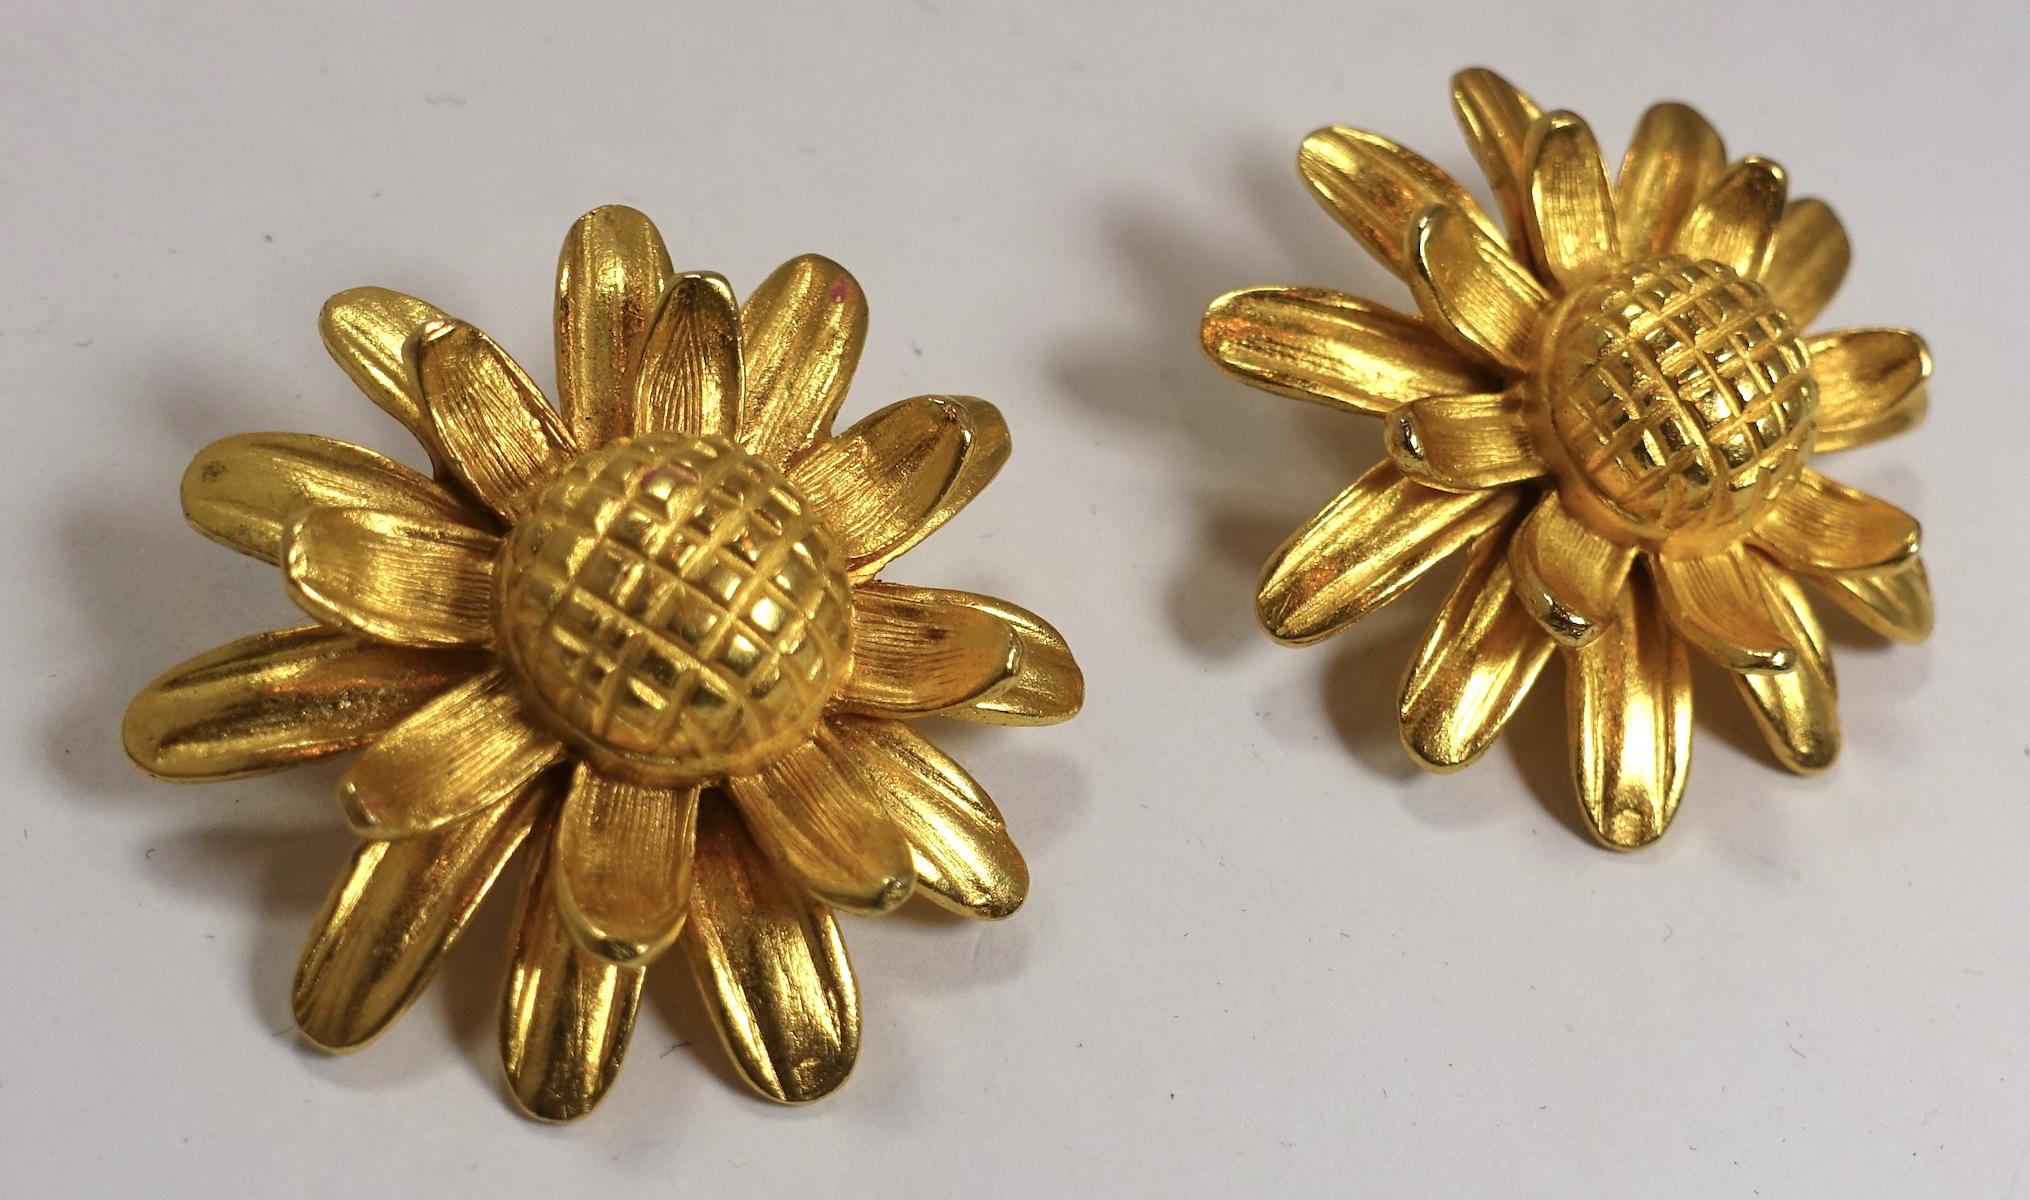 These vintage earrings feature a sunflower design in a heavily etched gold tone setting.  In excellent condition, these clip earrings measure 1-1/2” across.